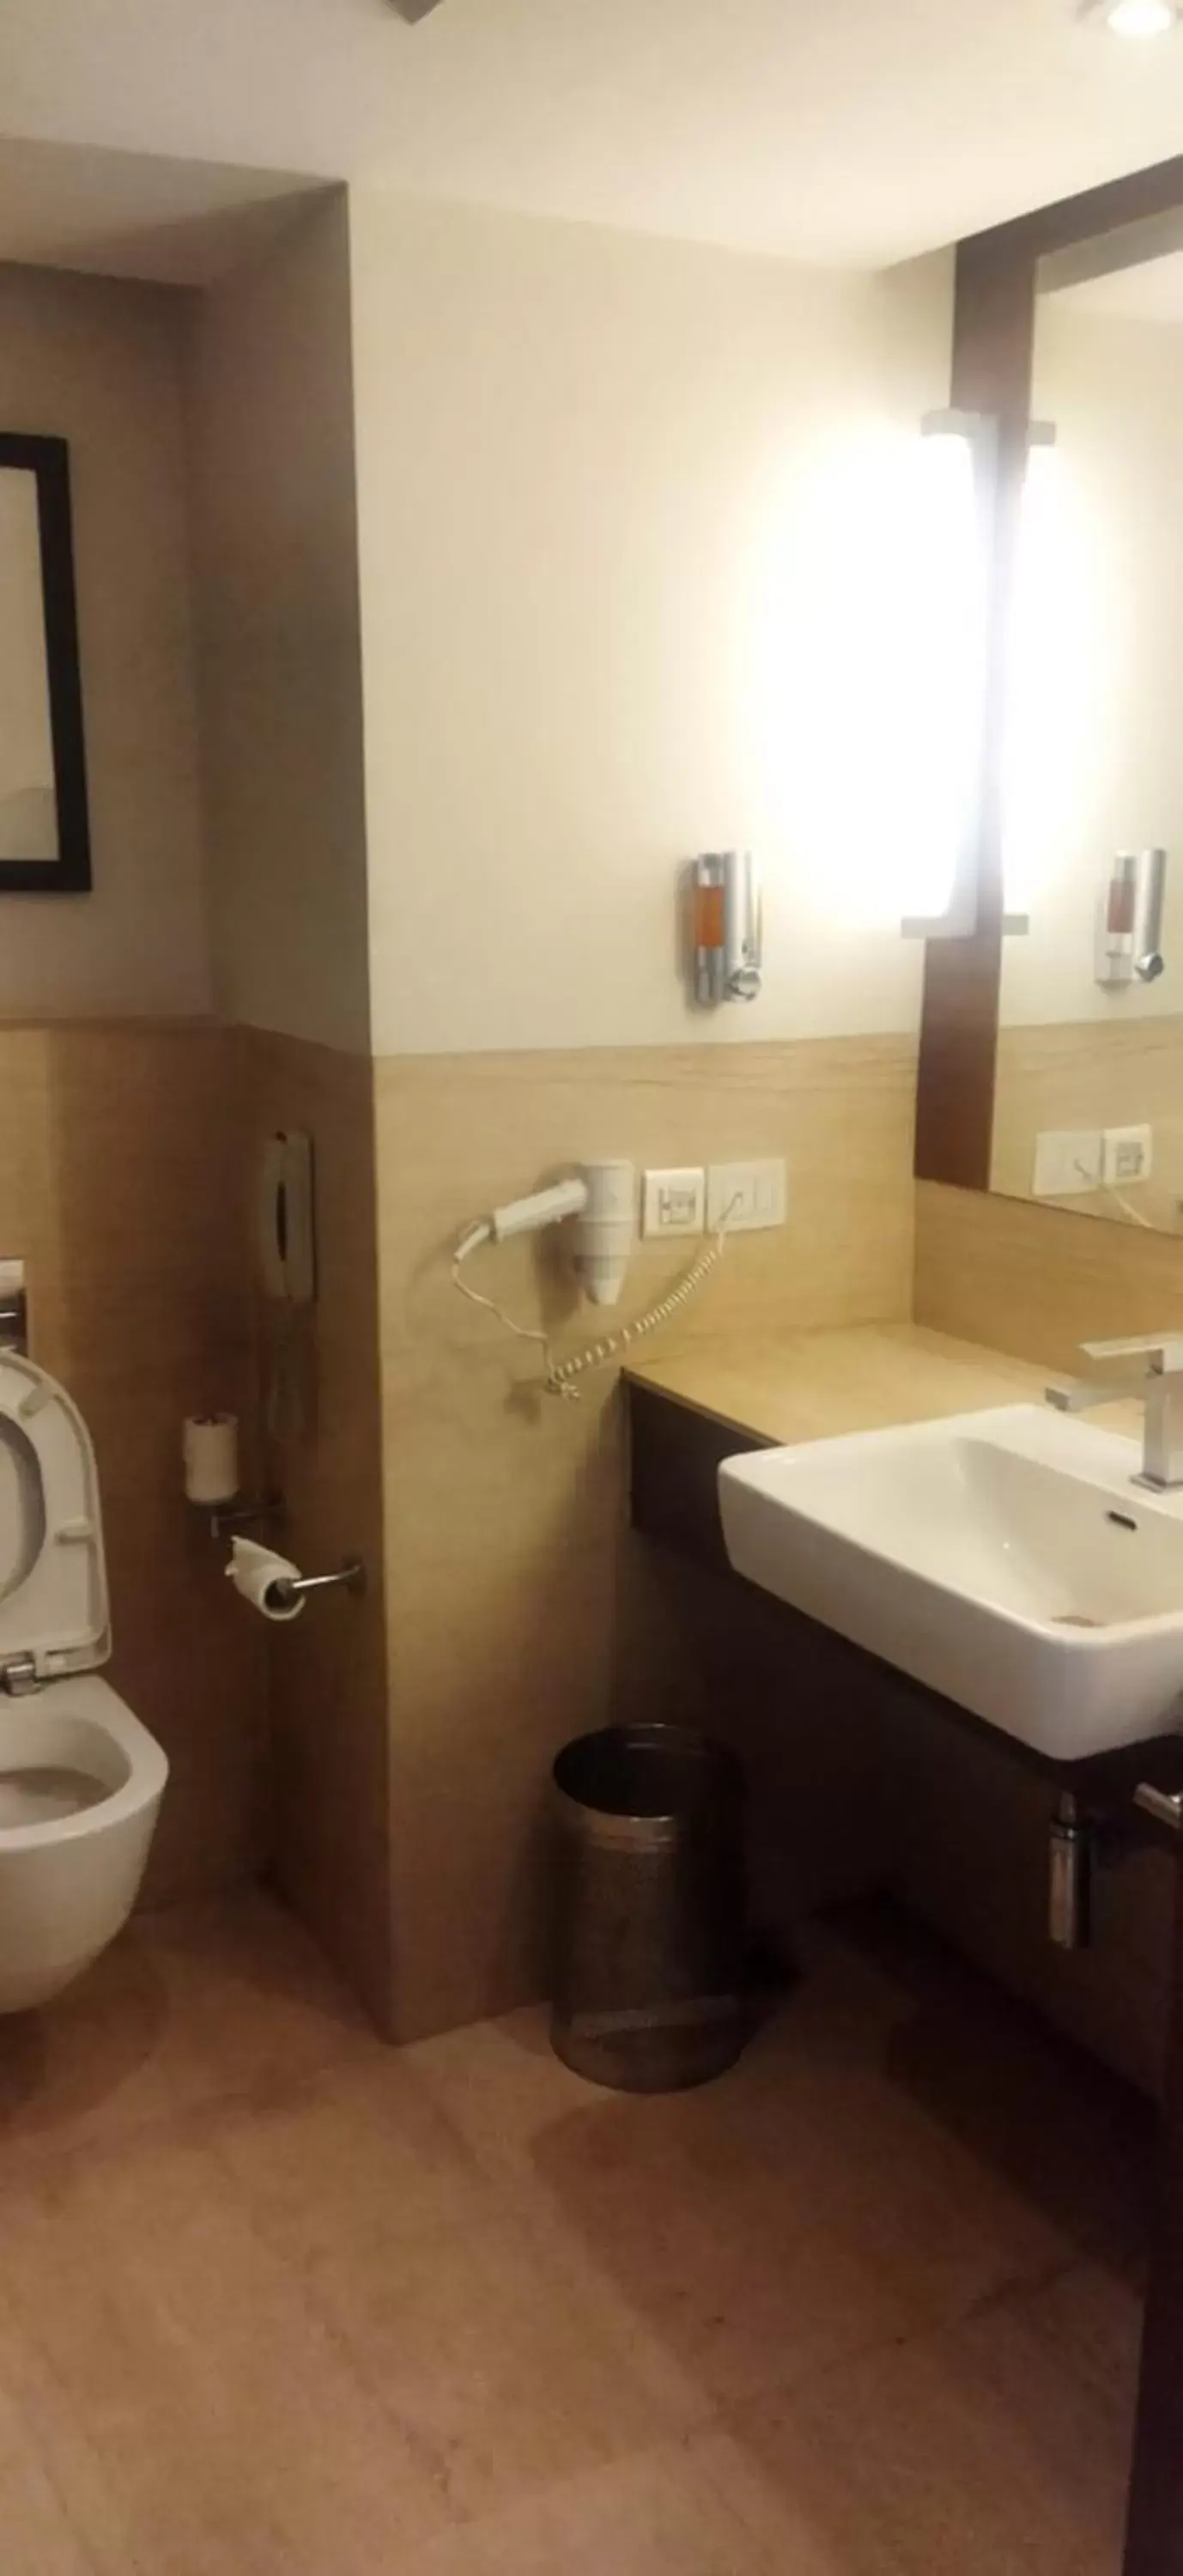 Bathroom in Fortune District Centre, Ghaziabad - Member ITC's Hotel Group